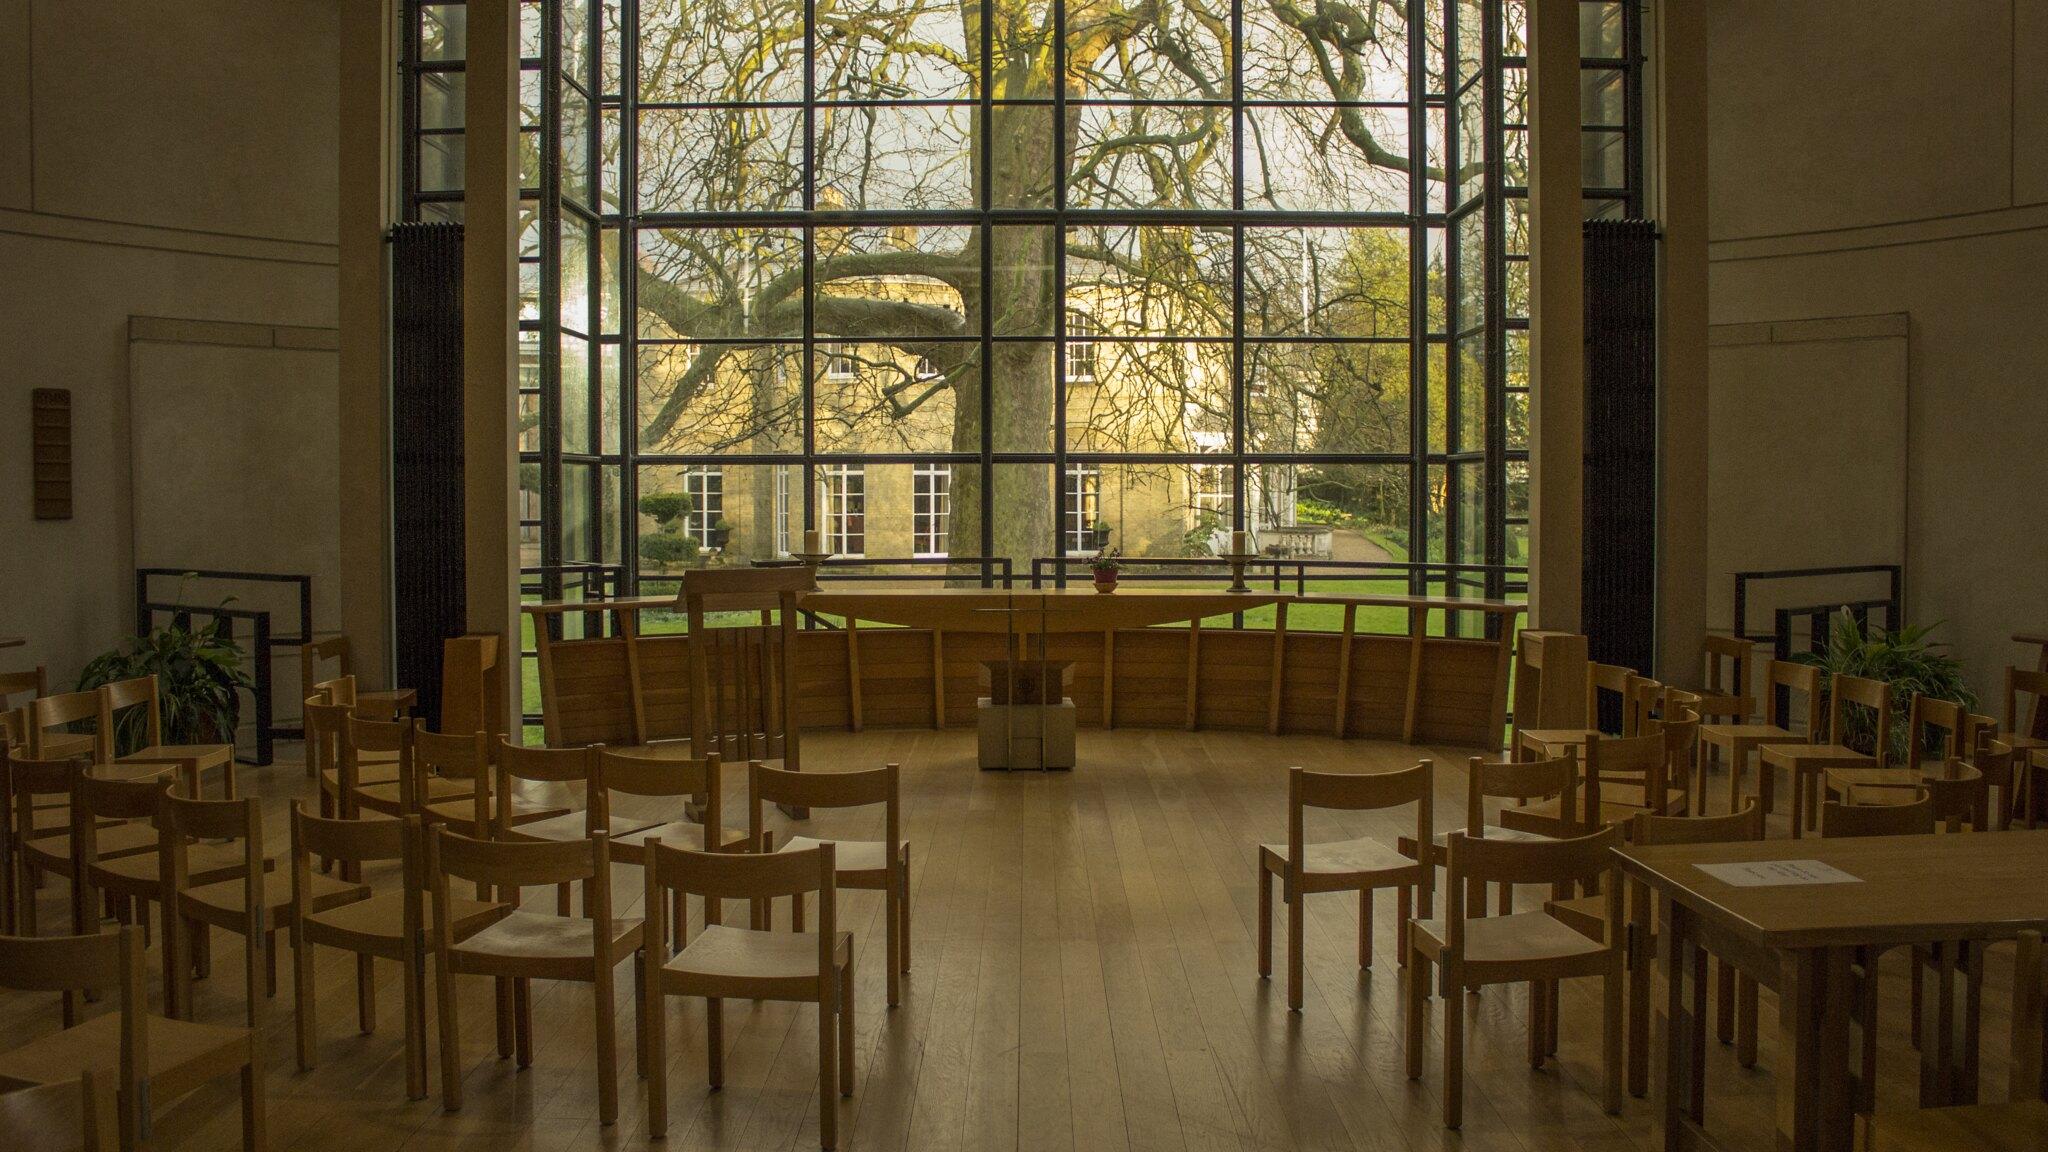 Wooden seating area with window overlooking a large tree